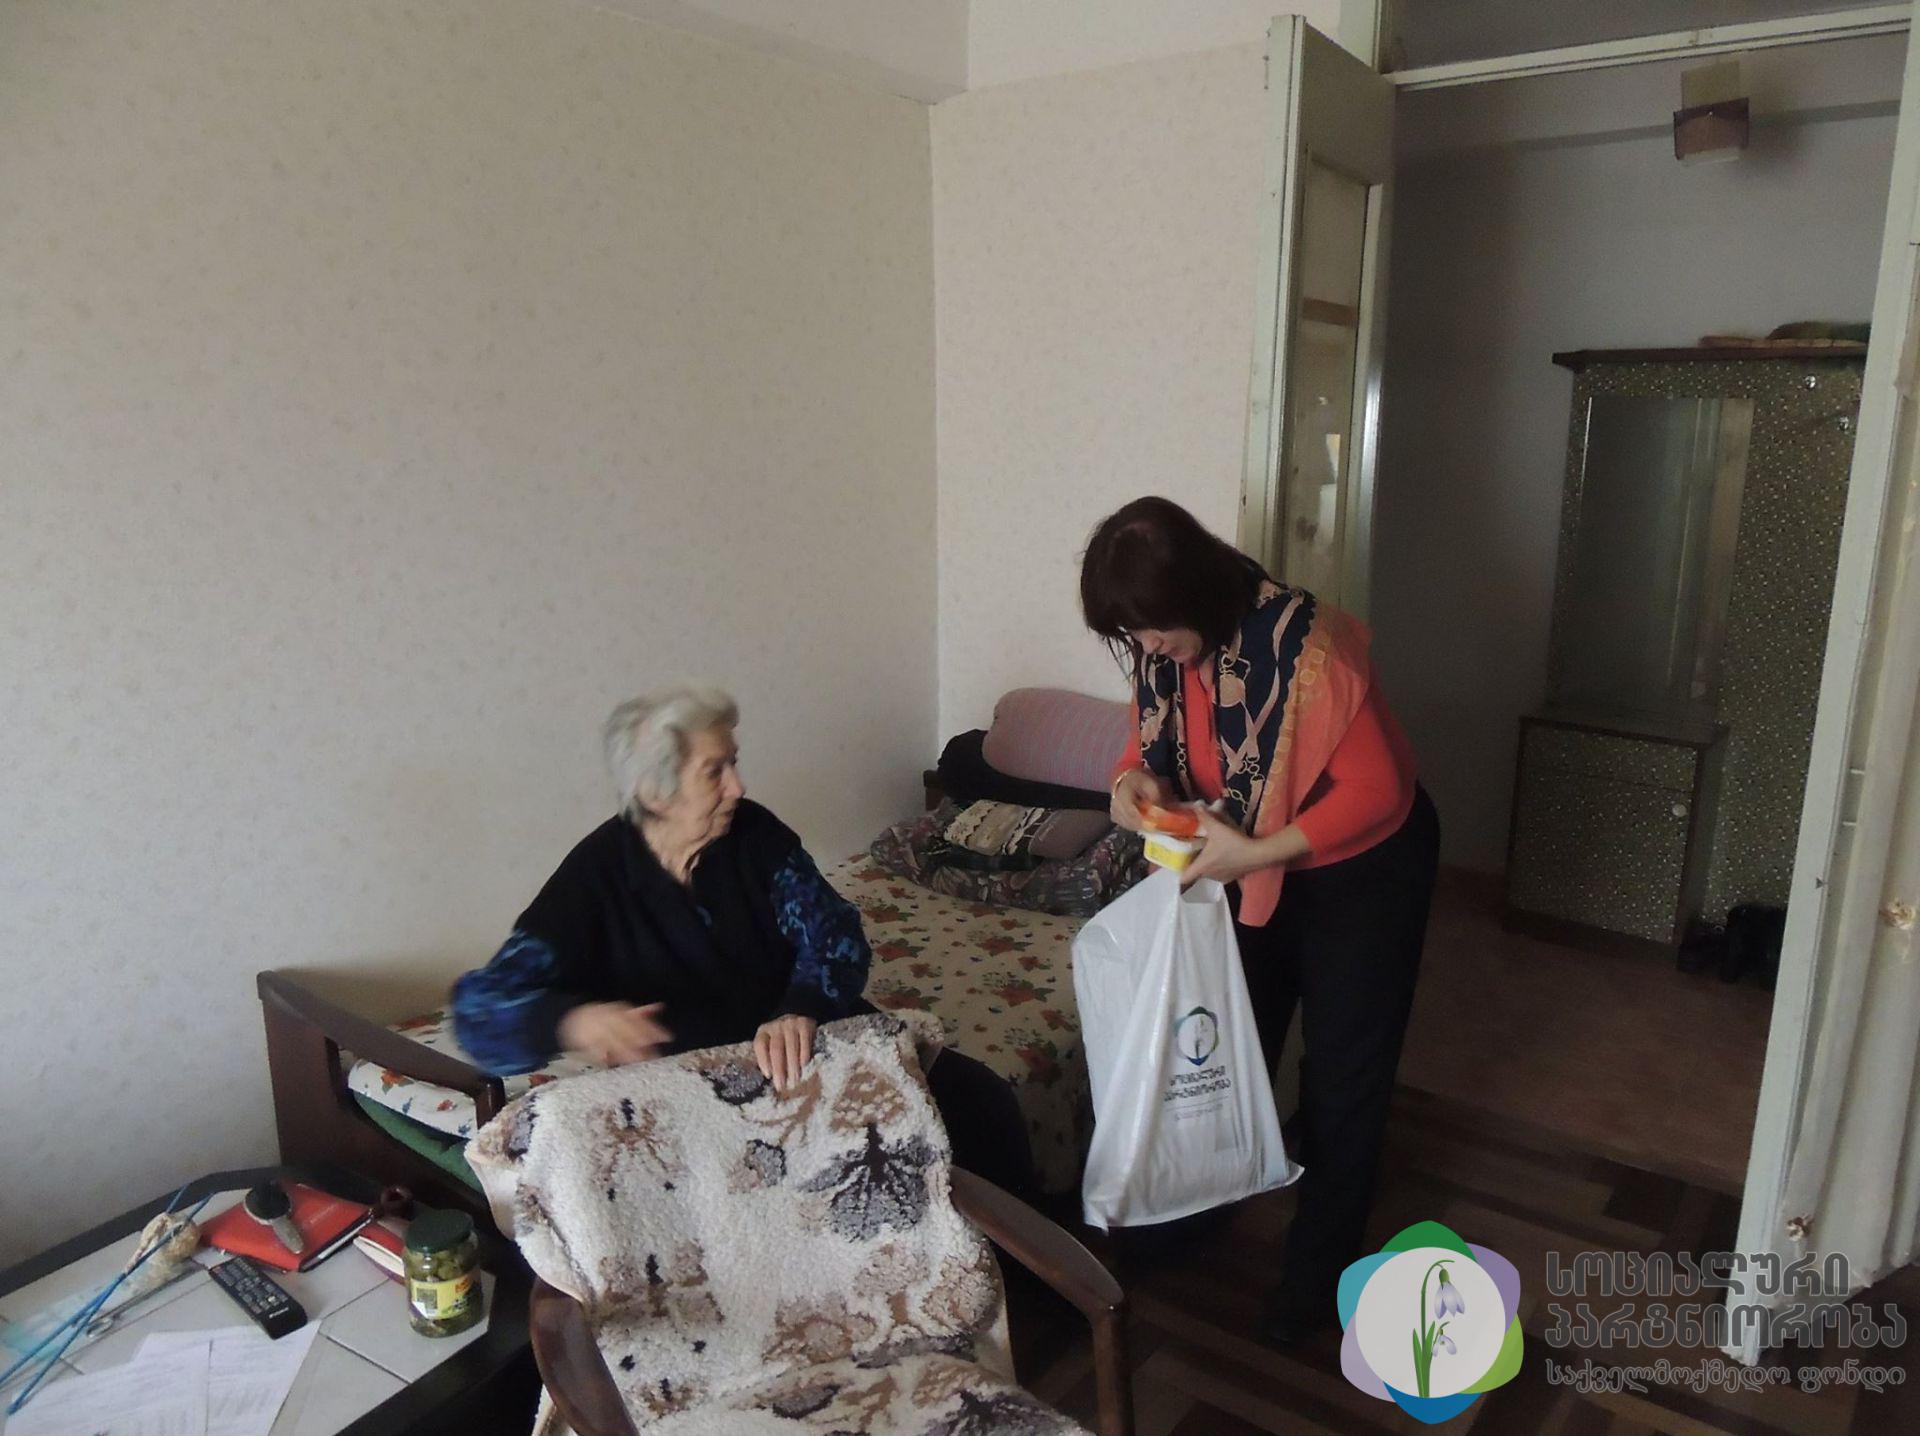 The refugees will be involved in the program “Home Care” image